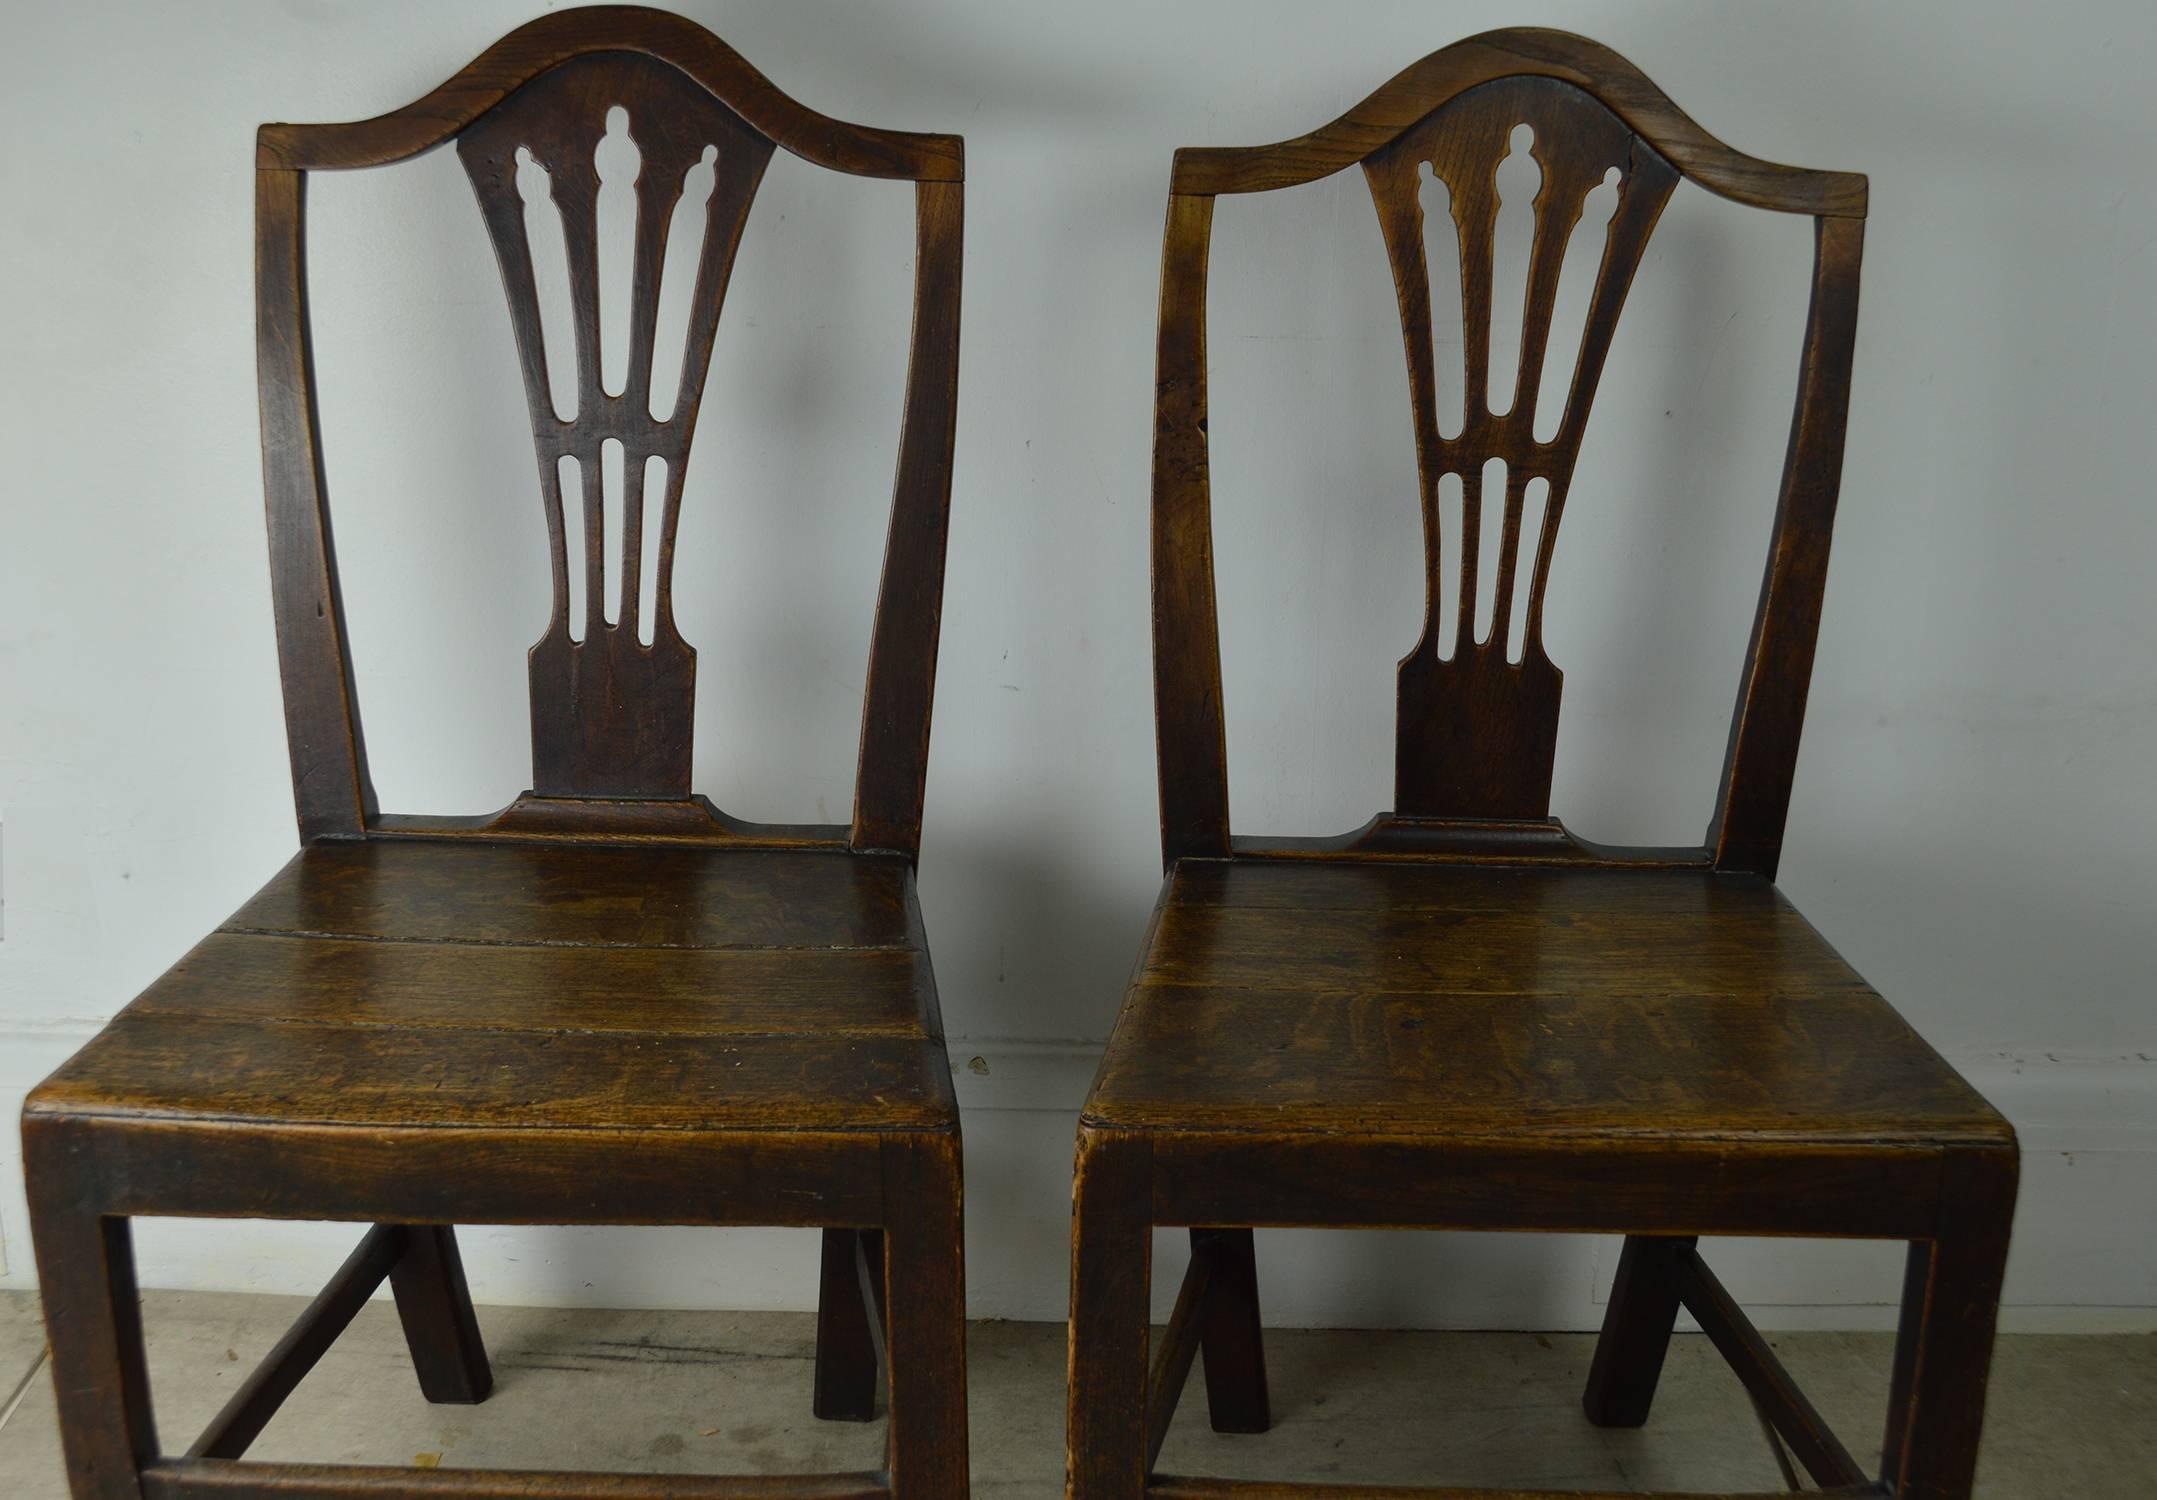 Great Britain (UK) Pair of Antique Oak Country Hepplewhite Chairs